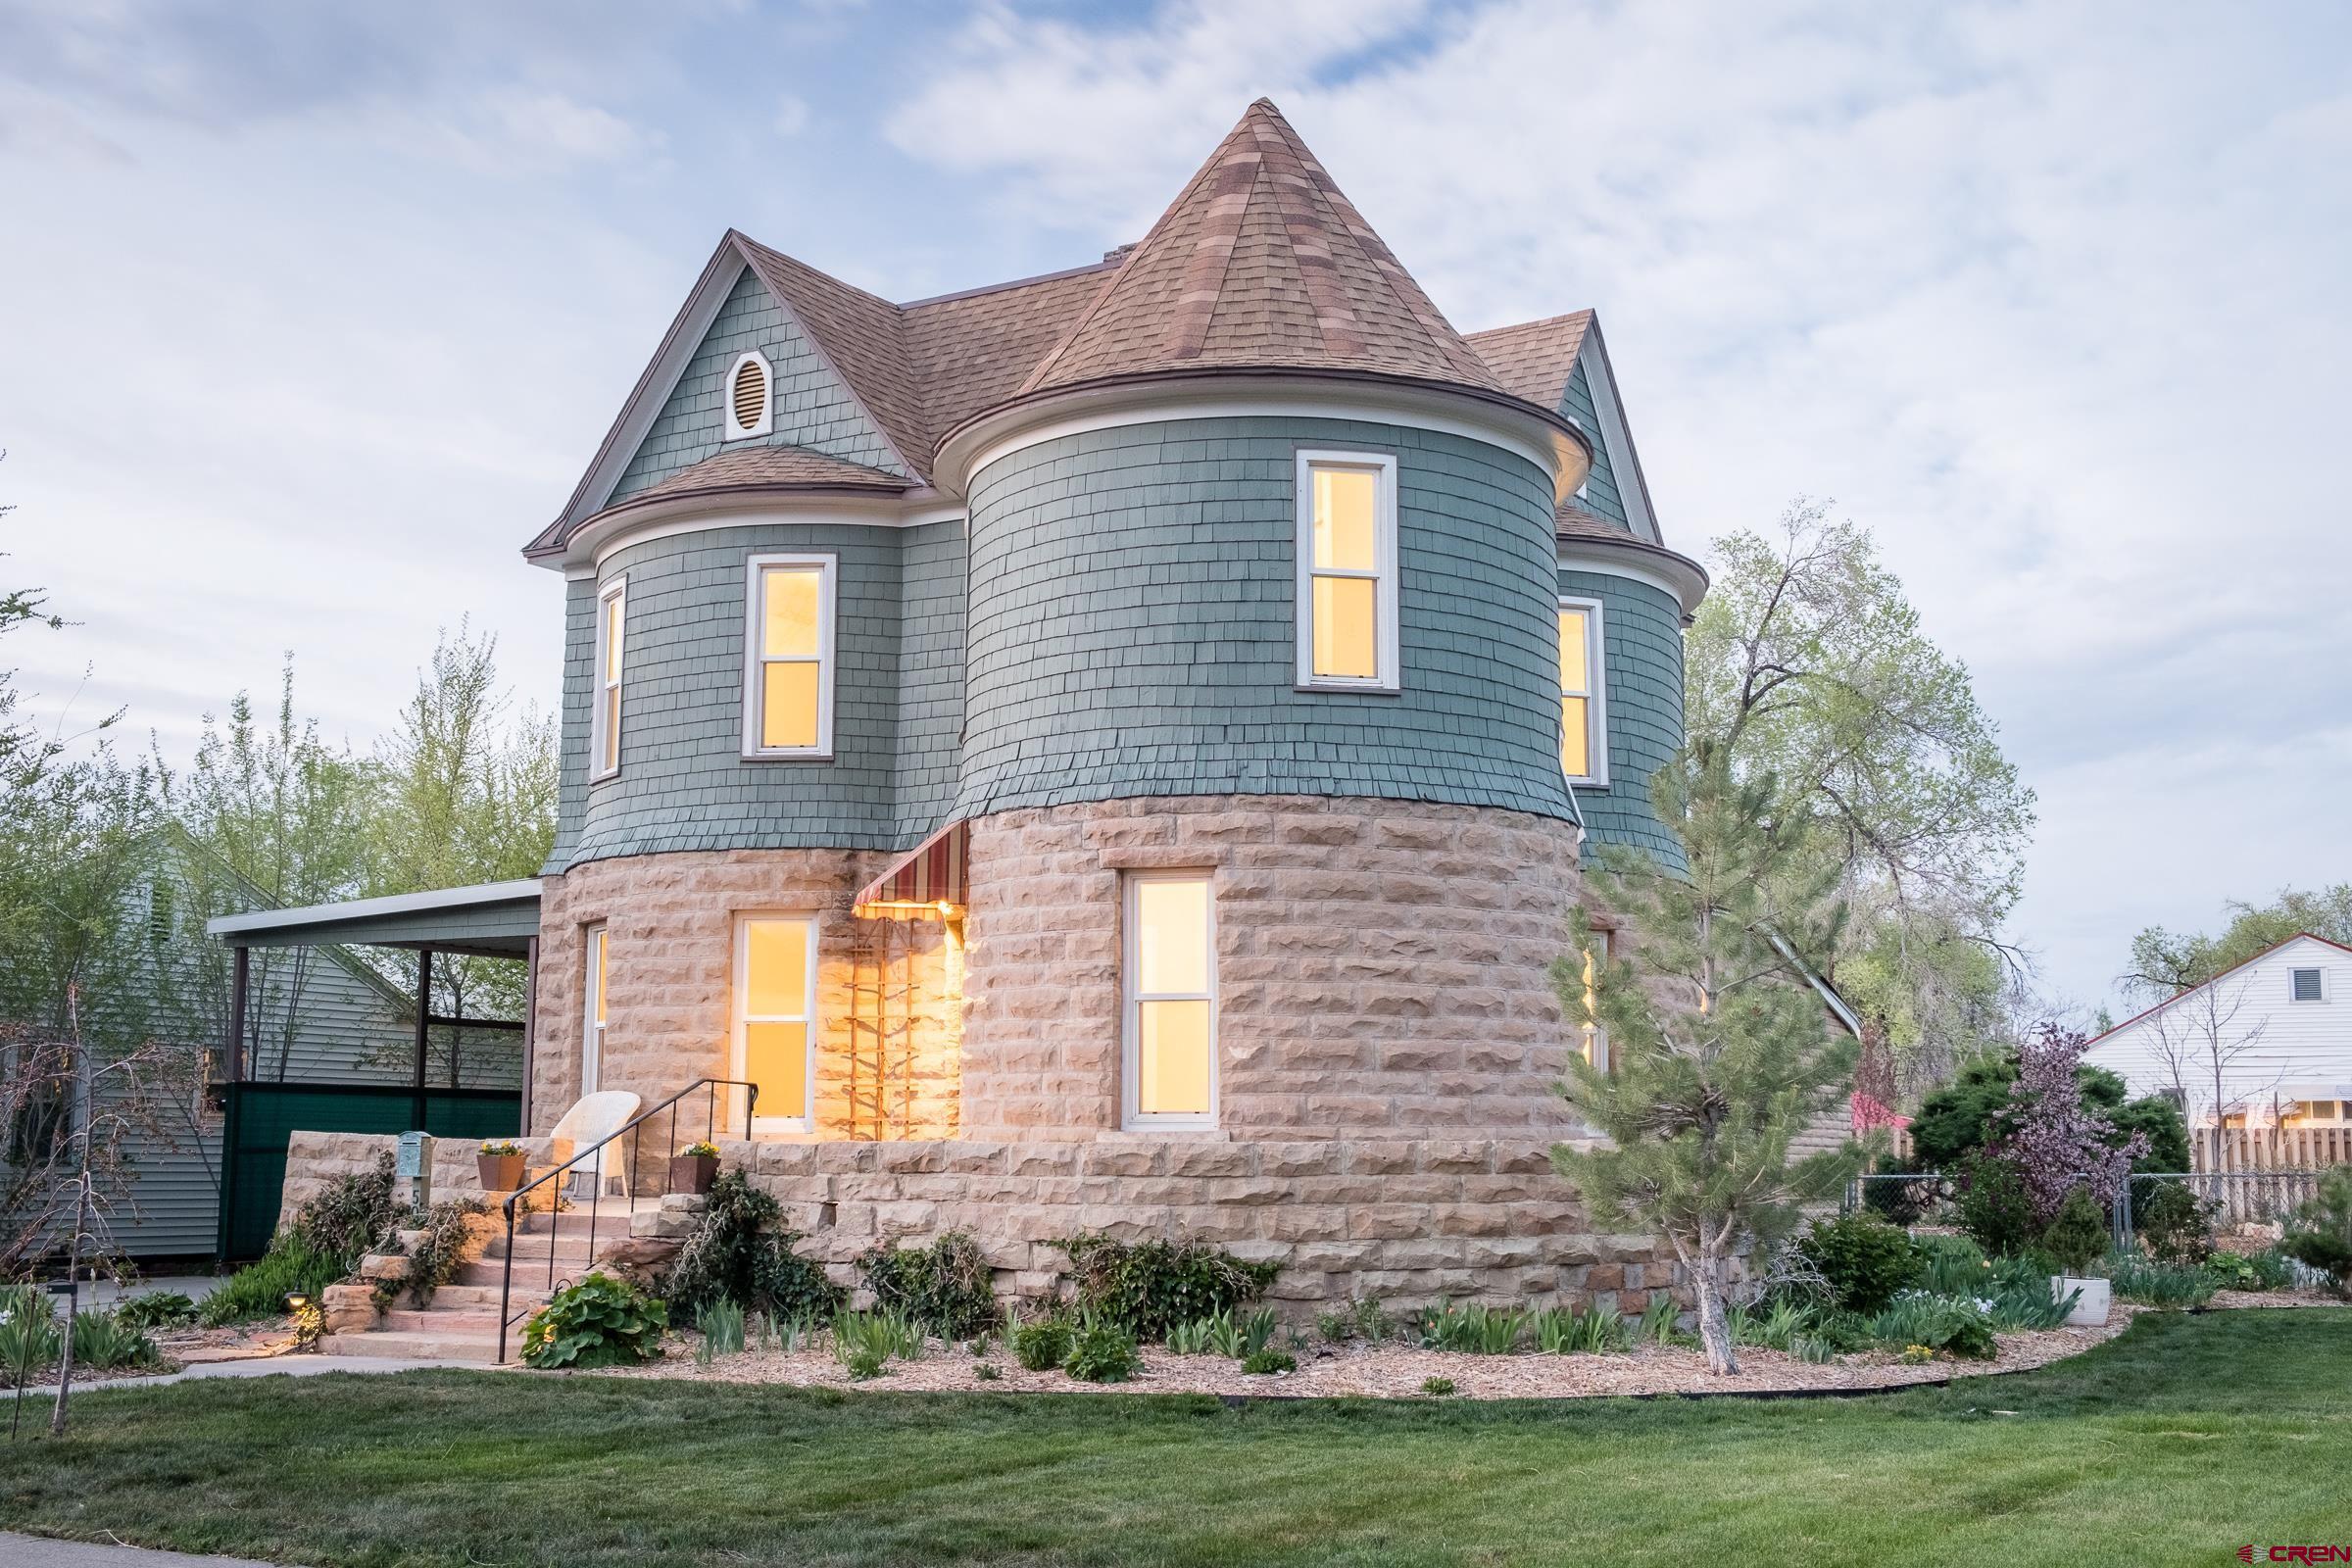 Own a rare piece of Colorado History located just minutes from downtown Montrose, restaurants, pubs, the river trail, fly fishing, the Uncompahgre River and live music venues.   Built in 1906 by Mr. Cassell, a local rancher and dairy farmer. the "Castle House", as it is known, is centrally located in the downtown Montrose area, within walking distance of brew pubs and restaurants. Situated in an up and coming quiet neighborhood. It is just two blocks from elementary schools and parks. The Montrose Regional Hospital is an easy seven blocks way. The French Chateauesque and Turn of the Century Farmhouse is built from locally cut sandstone. There is one complete turret and two partial turrets. The foundation is at least 7’ deep and was originally constructed to accommodate the storage of milk from the local dairy.  There are 3 bedrooms and 2 full bathrooms plus an additional small sunny room in the turret. It has a closet but is quite perfect for an office, nursery, library or artist studio. The bedroom downstairs could also be an office or family room. Large closets- two per room, in each bedroom. Two living spaces on the lower floor. There is generous storage space in both the attic and the cellar. The cellar is accessed via stairs from the kitchen and has a concrete floor.   The backyard is fenced with a spacious outdoor covered porch off the kitchen. This home sits on a corner of two downtown streets with mature trees on 4 city lots! There is ample space to build a future large garage or carriage house with access from the alley. This home is located within the City's "Redo" district and the construction of an ADU or Accessory Dwelling Unit is permitted and encouraged.   Mature shade trees, fully landscaped with fenced back yard and complete sprinkler system. Off-street parking. Carport. Tall enough for RV or boat storage. Comfortable house for entertaining, with separate bar area. This entire home and property have been renovated with the following NEW Upgrades and complete replacements/restorations: Original 1906 wood floors- refinished All remaining floors in kitchen and baths are replaced with hard surface flooring 100% Paint- inside and out. New Sump Pump and water heater New Bathroom Velux skylight All New upgraded 200 amp electrical service and breaker panel New Central Air Conditioning Full kitchen replacement- premium soft-close cabinetry, GE oven with Air Fryer, GE microwave, stainless steel farm sink, new GE refrigerator and newer dishwasher. New plumbing, garbage disposal and electrical to kitchen area. Walnut cutting board and quartz countertops. Custom stained glass window from local artist custom made for the house. All new light fixtures New attic access ladder New front and back doors. Front door custom made locally, for this house. New, locally custom made awning over the front door. Back porch remodel. New landscaped backyard. New Kitchen windows Both bathrooms have been completely replaced. New electric fireplace in the living area, built into a custom mantle. Tile was made in Montrose by Particular Tile Company. The cast iron trim was repurposed from the original 1906 fireplace. Bar area includes beverage fridge, solid walnut countertop and bar sink. All kitchen, bar, and fireplace tile custom made in Montrose by Particular Tile with the mud locally sourced from Paonia Reservoir.